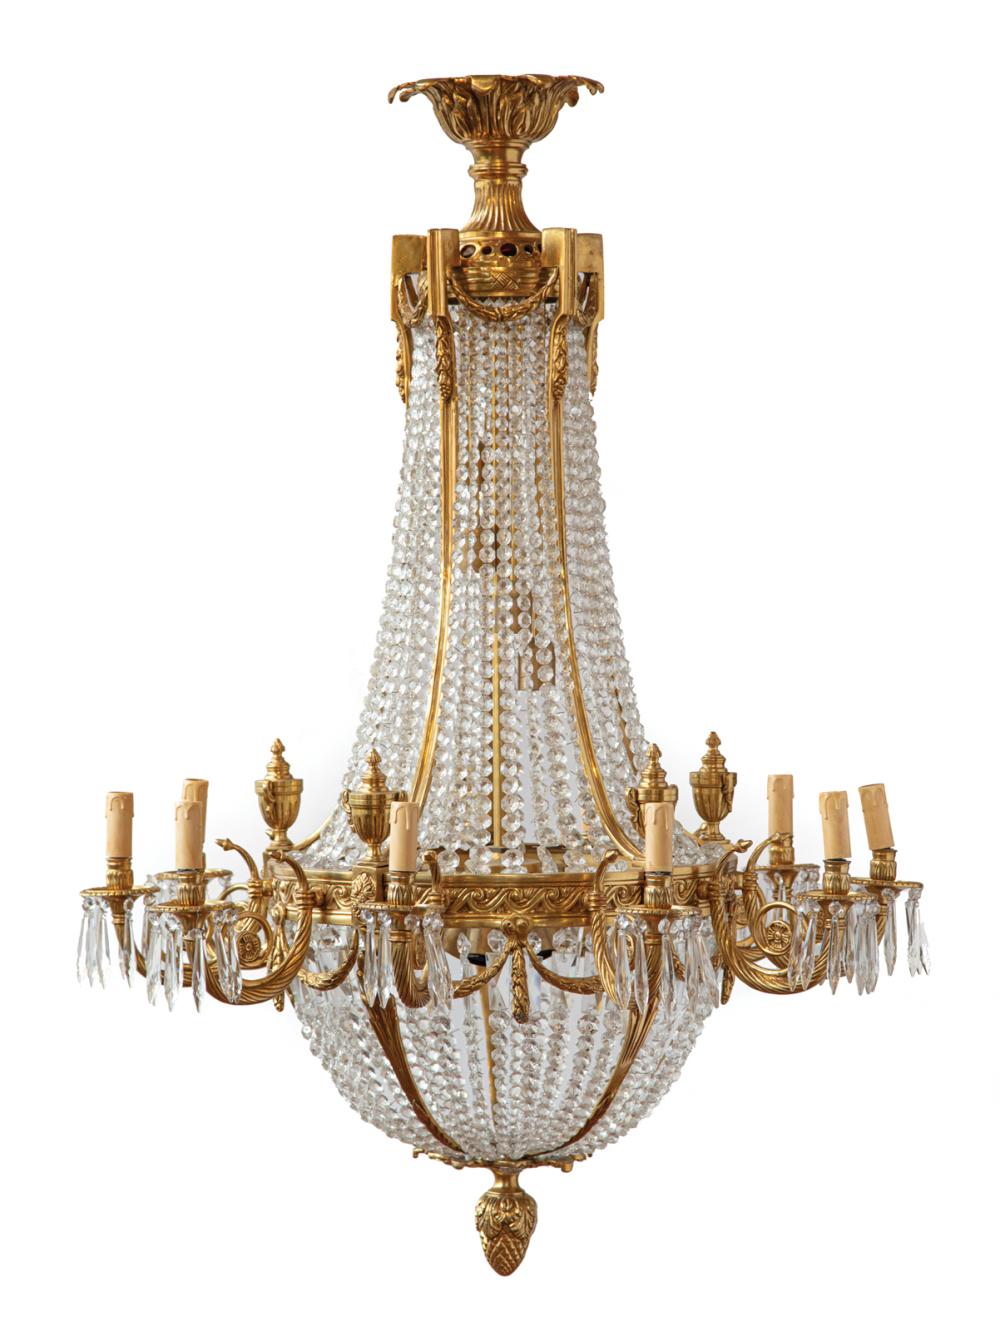 FRENCH BRONZE AND CRYSTAL CHANDELIERFrench 318d91